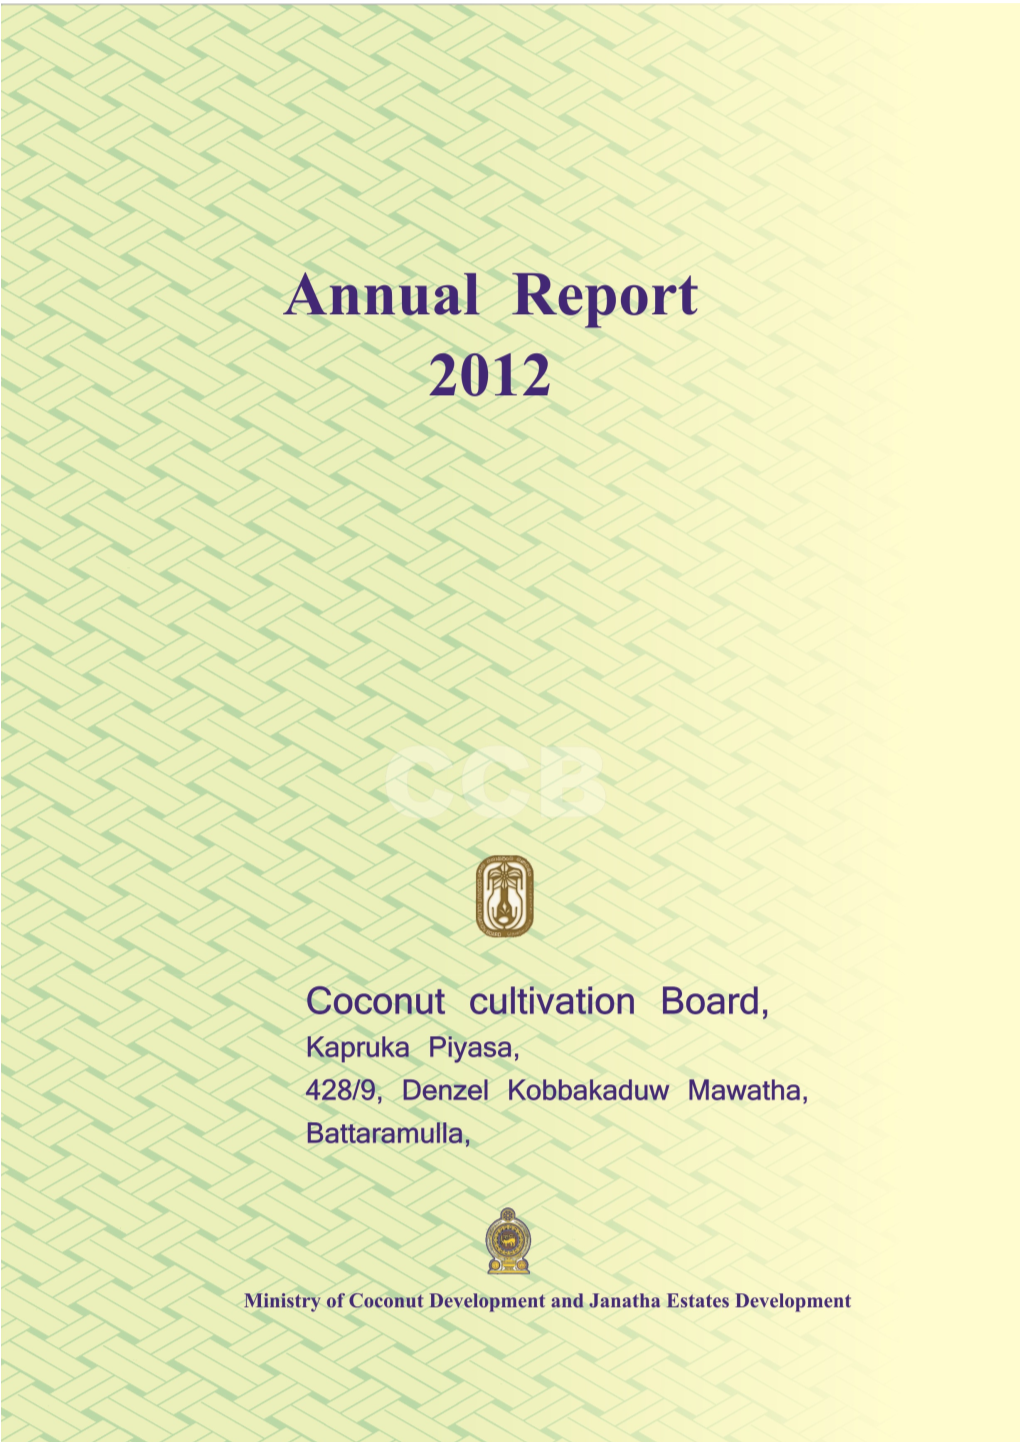 Coconut Cultivation Board for the Year 2012